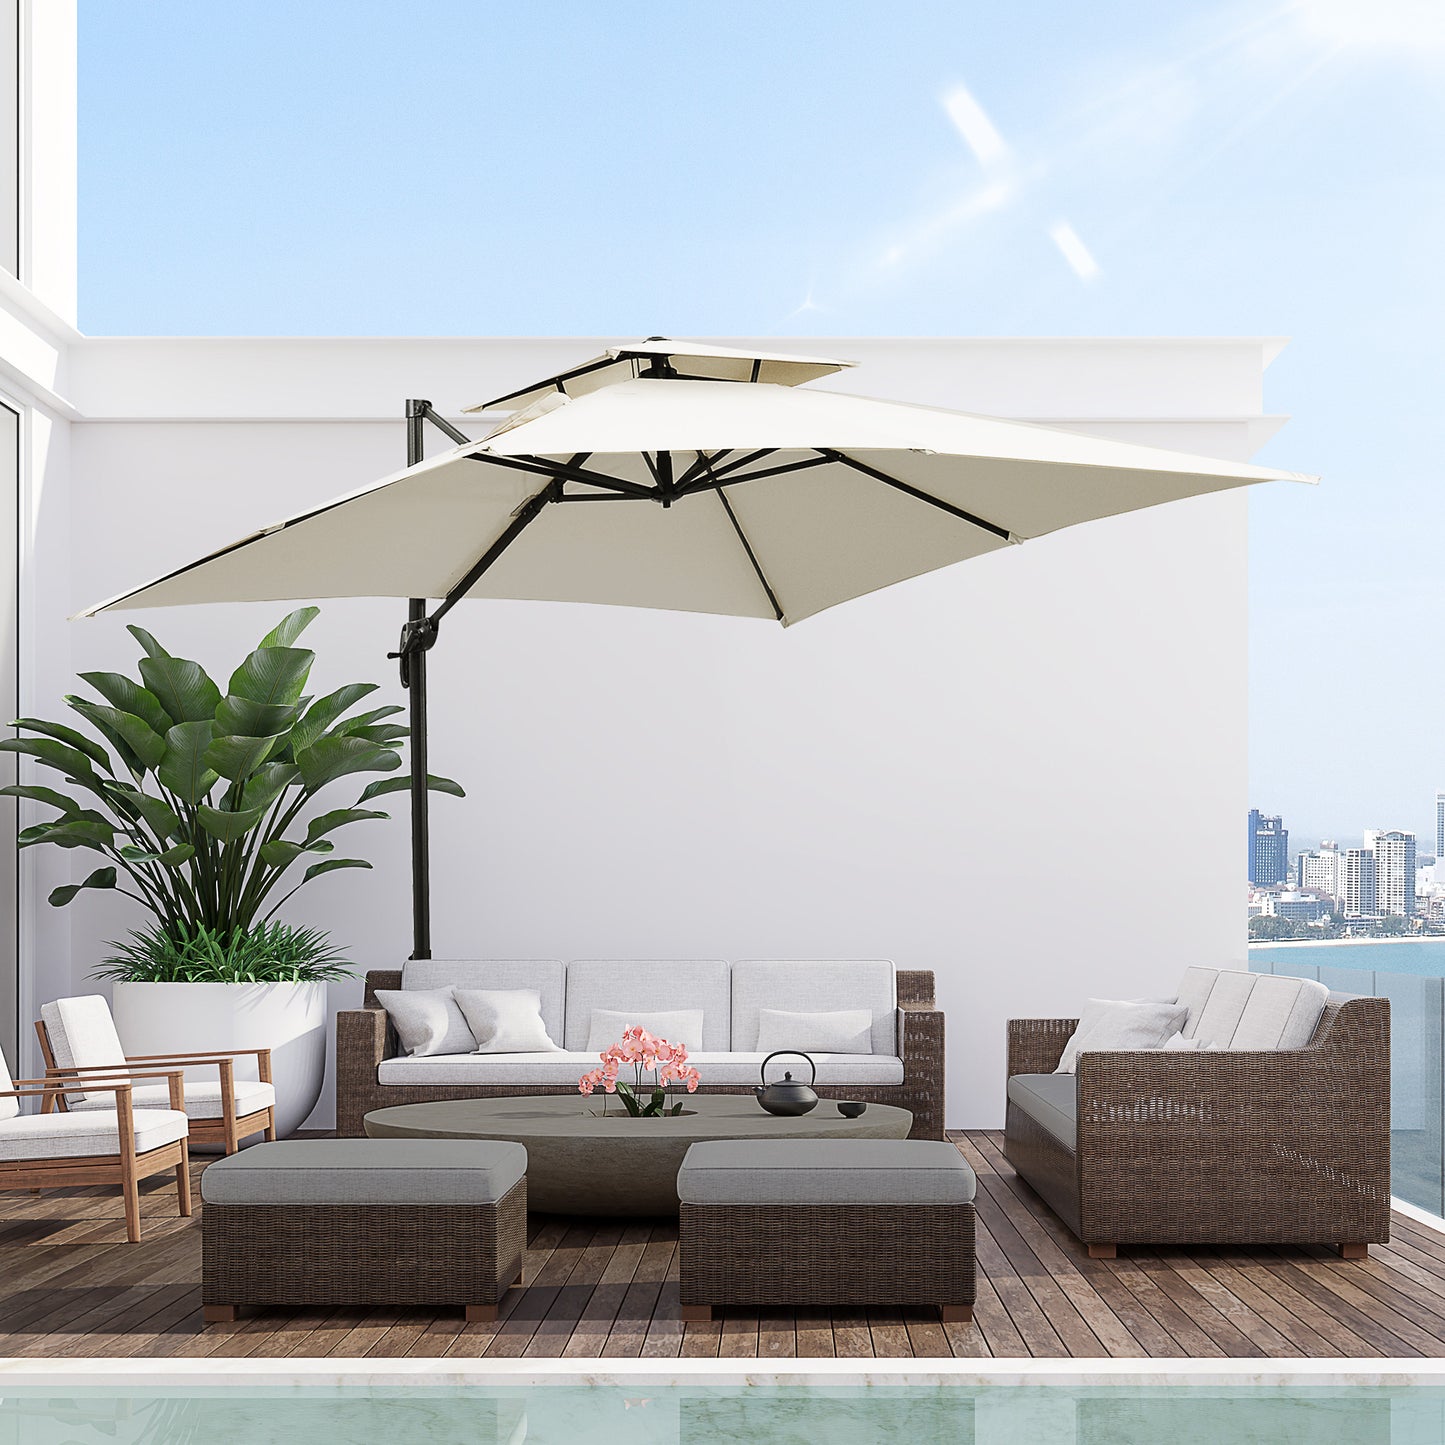 Outsunny 3 x 3(m) Garden Cantilever Parasol with Crank and Tilt, Square Overhanging Patio Umbrella with 360° Rotation, Base Weights and Cover, Beige